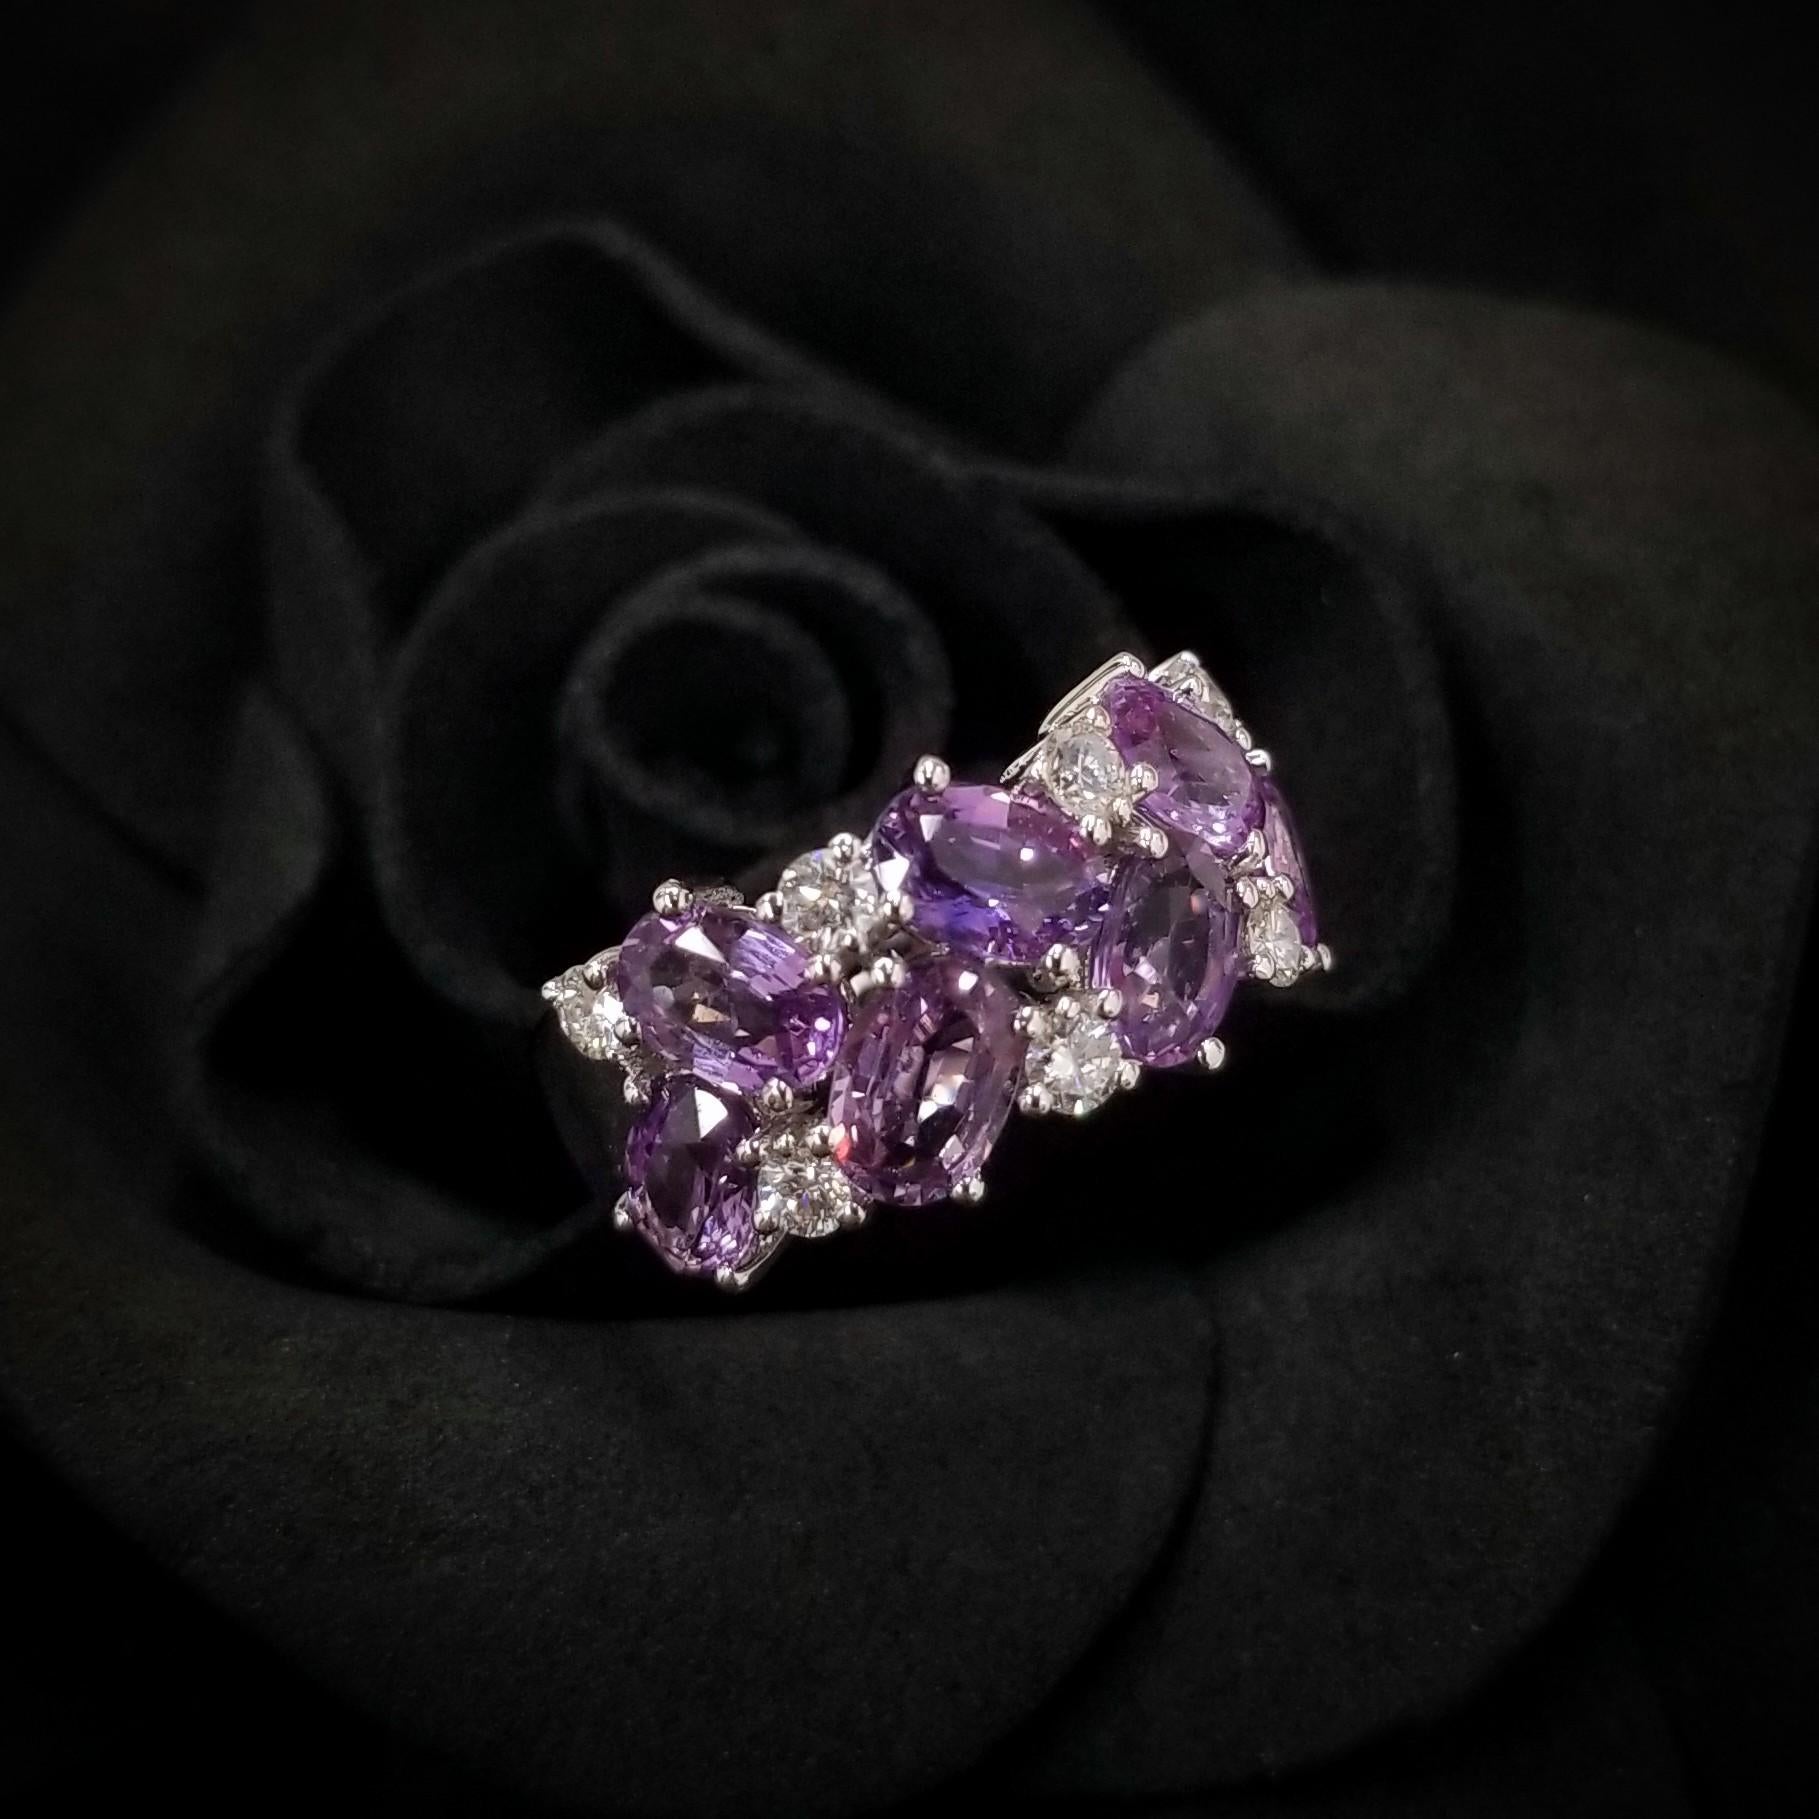 Crafted in 18K white gold, this extraordinary piece showcases a captivating 7 pieces of oval cut of purple sapphires in exceptional quality and beauty.  It is complemented by 0.37 carats of round brilliant-cut diamonds adding sparkle and light to